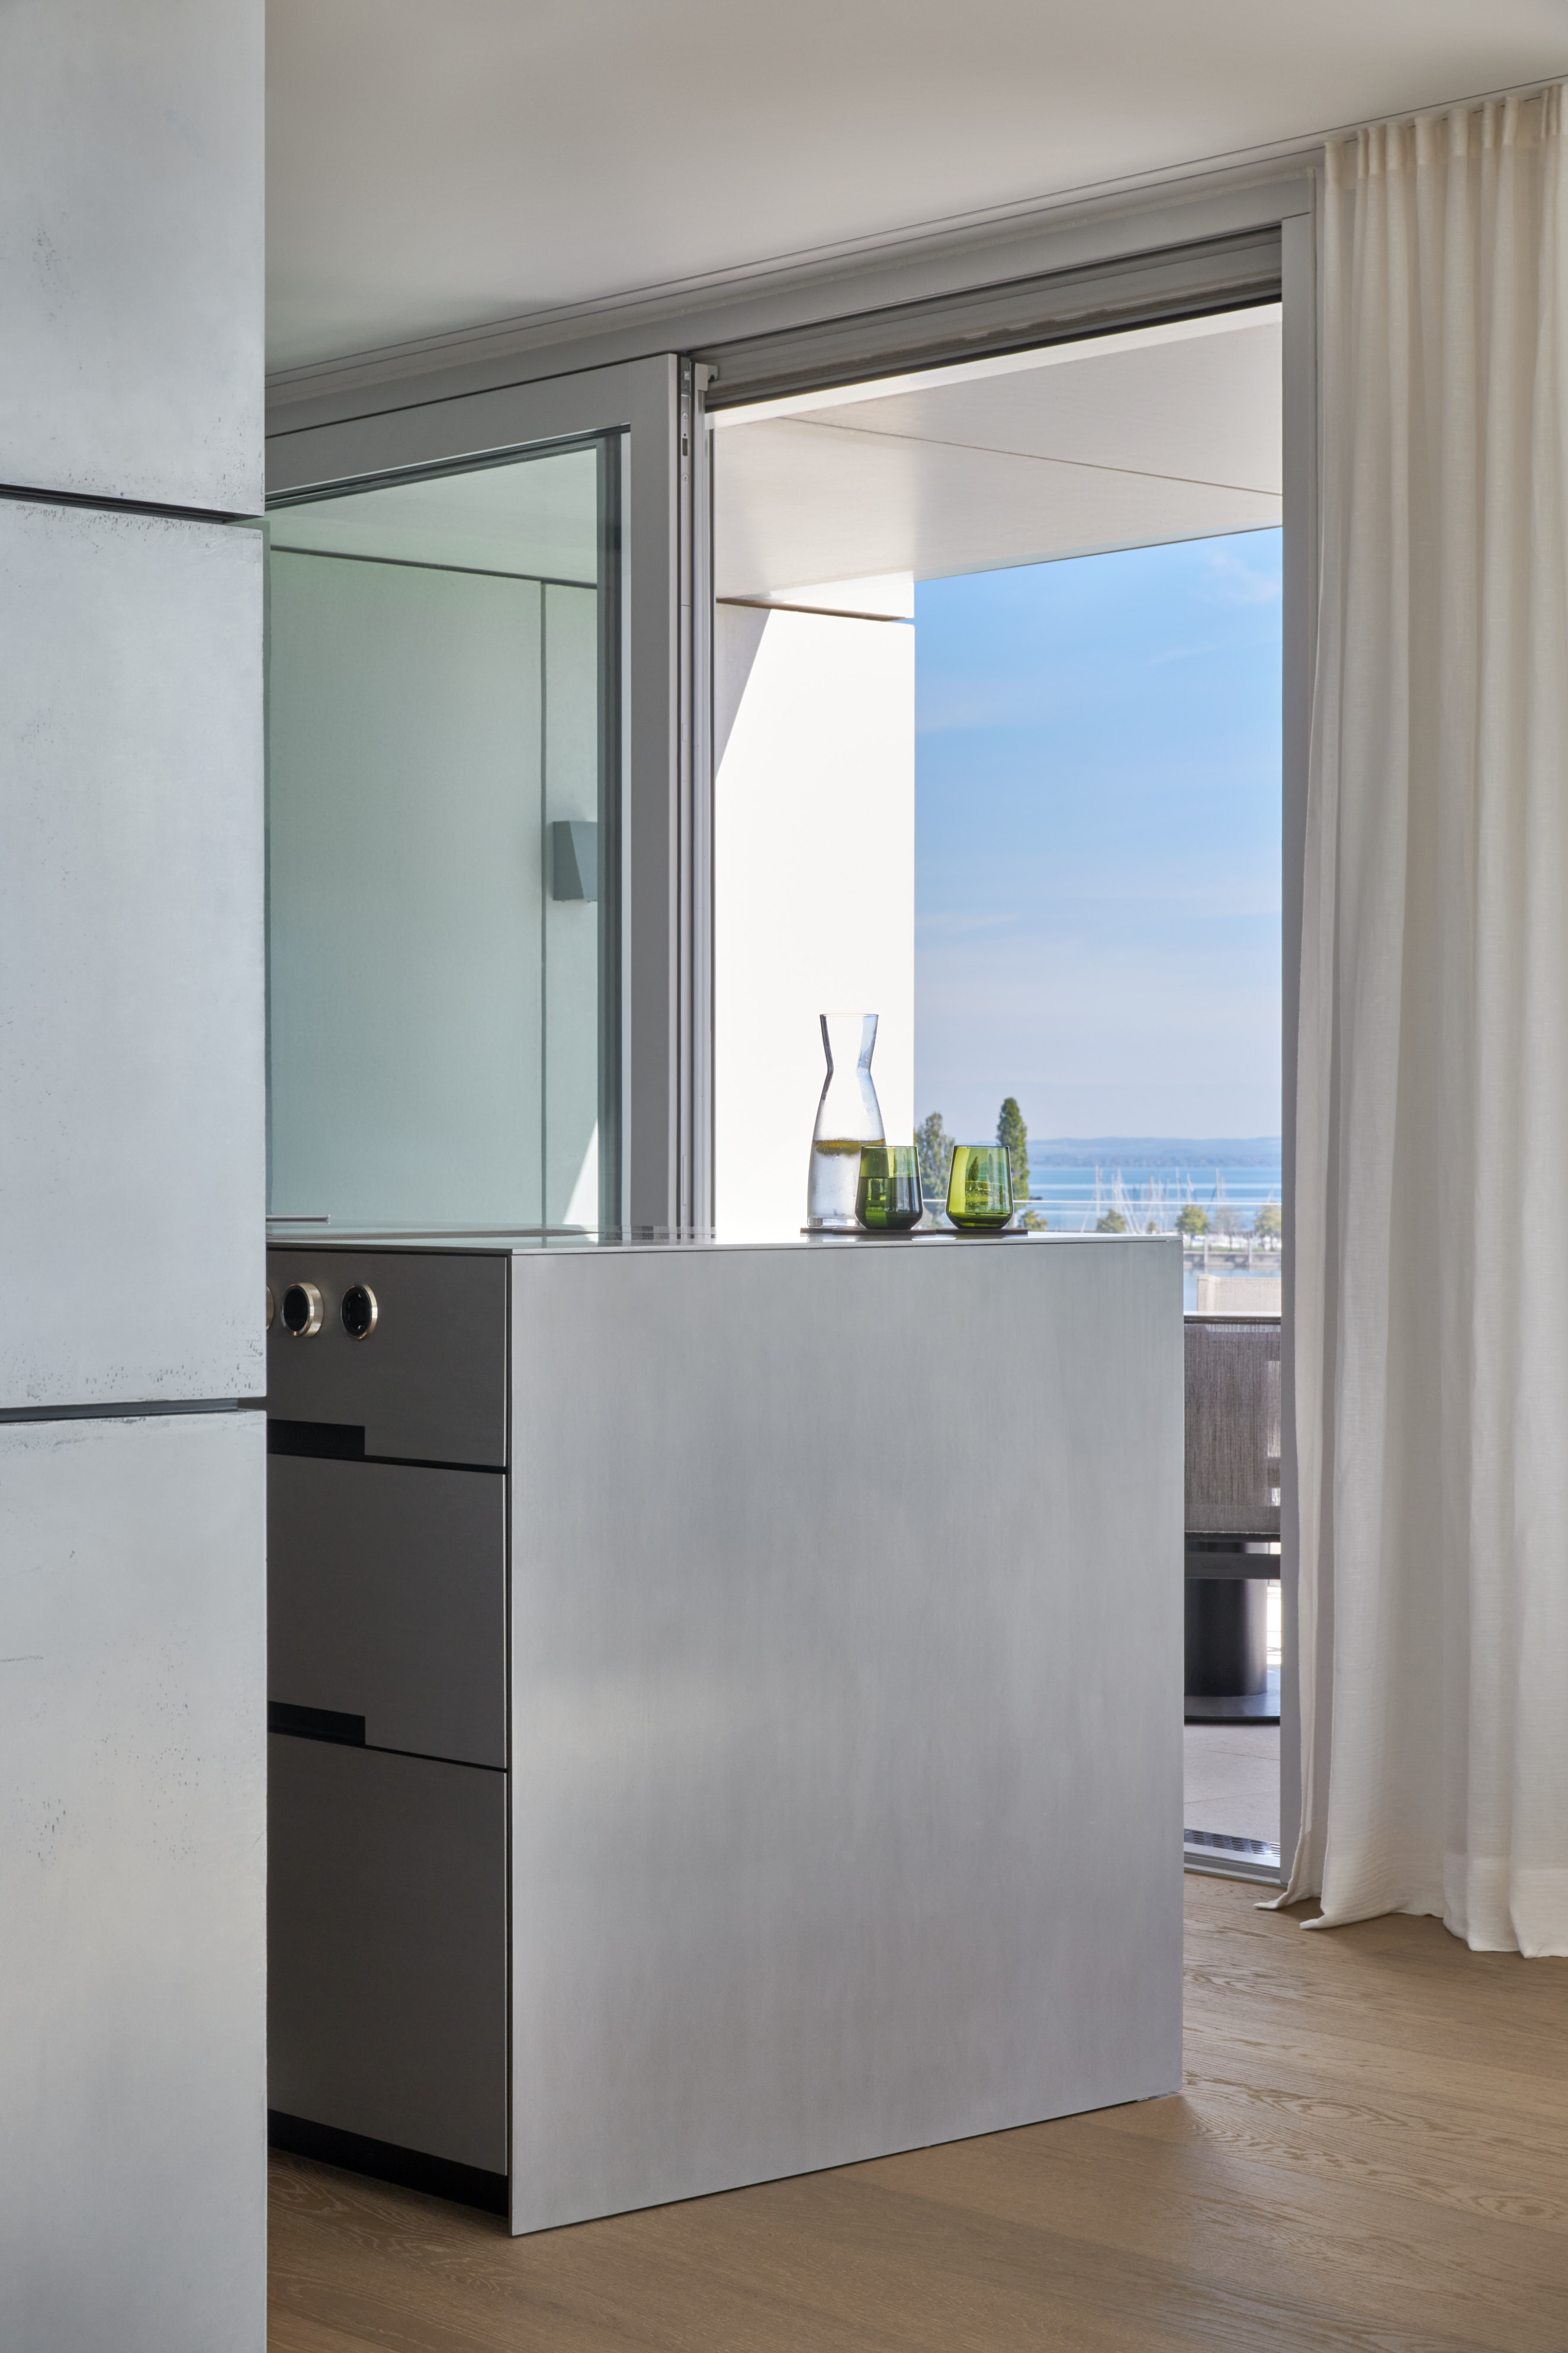 Midas Metall Lack Surface Arbon Lake Constance Bodensee Penthouse Stainless steel kitchen counter